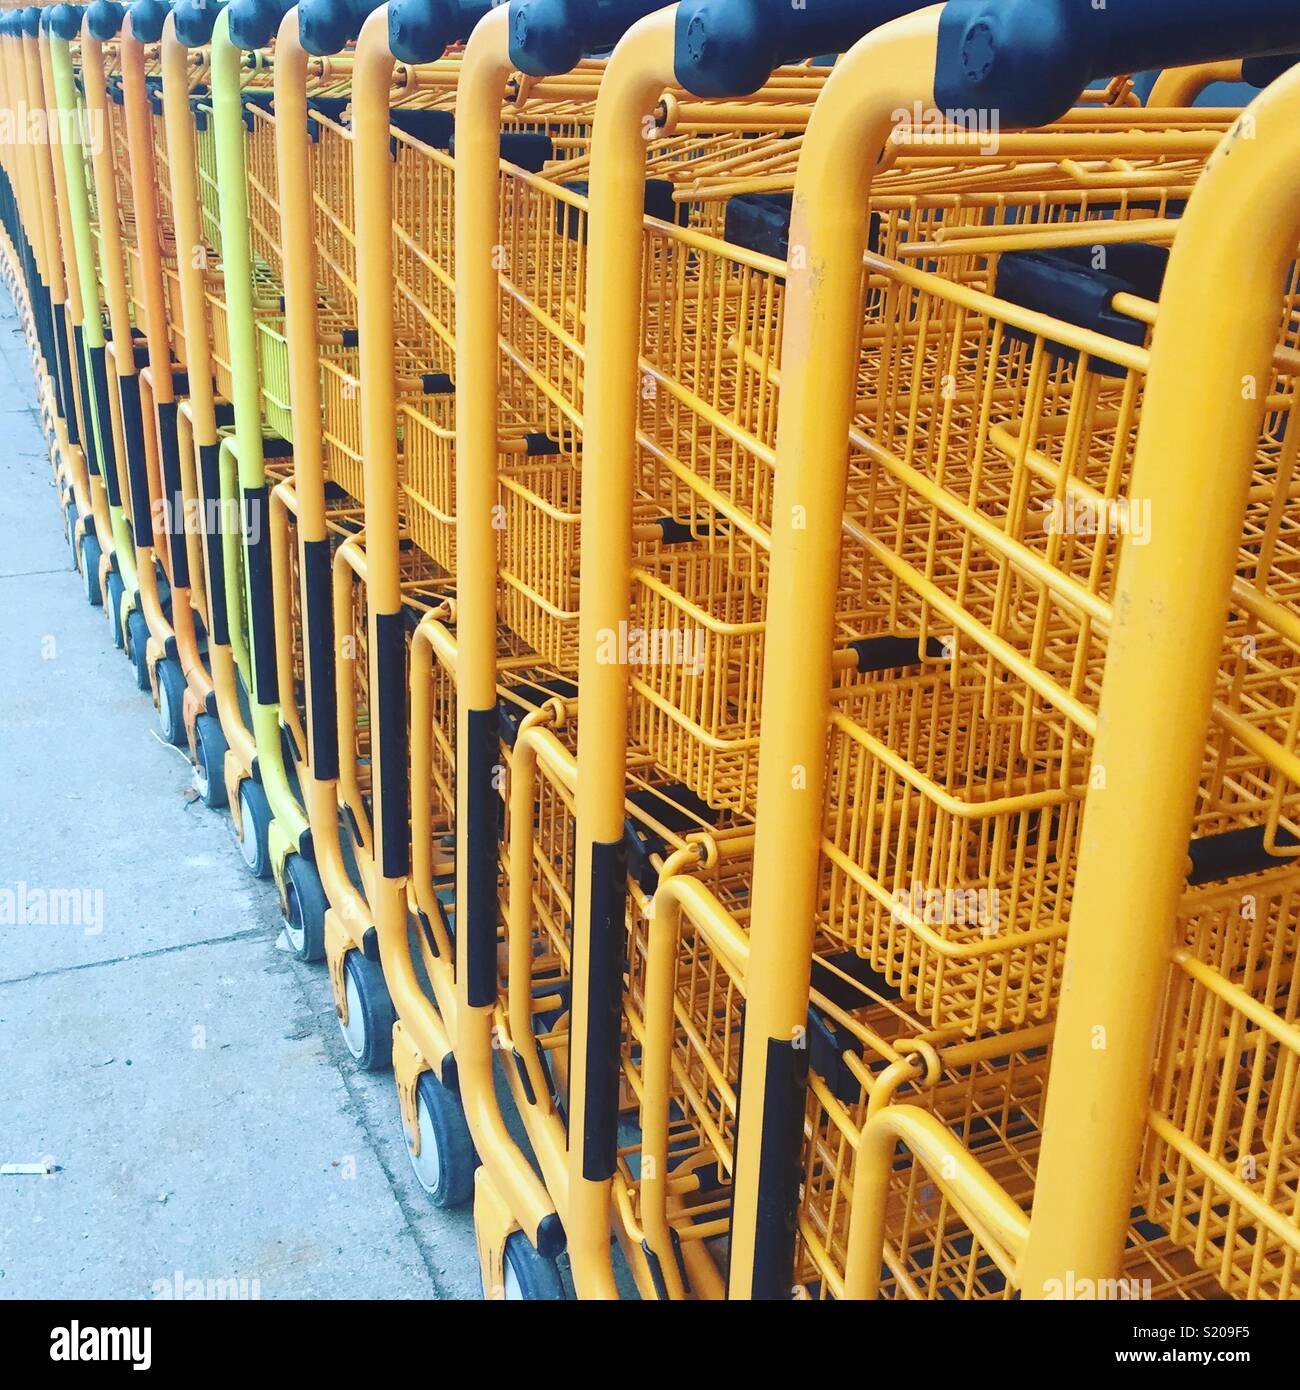 Yellow shopping carts by K.R. Stock Photo